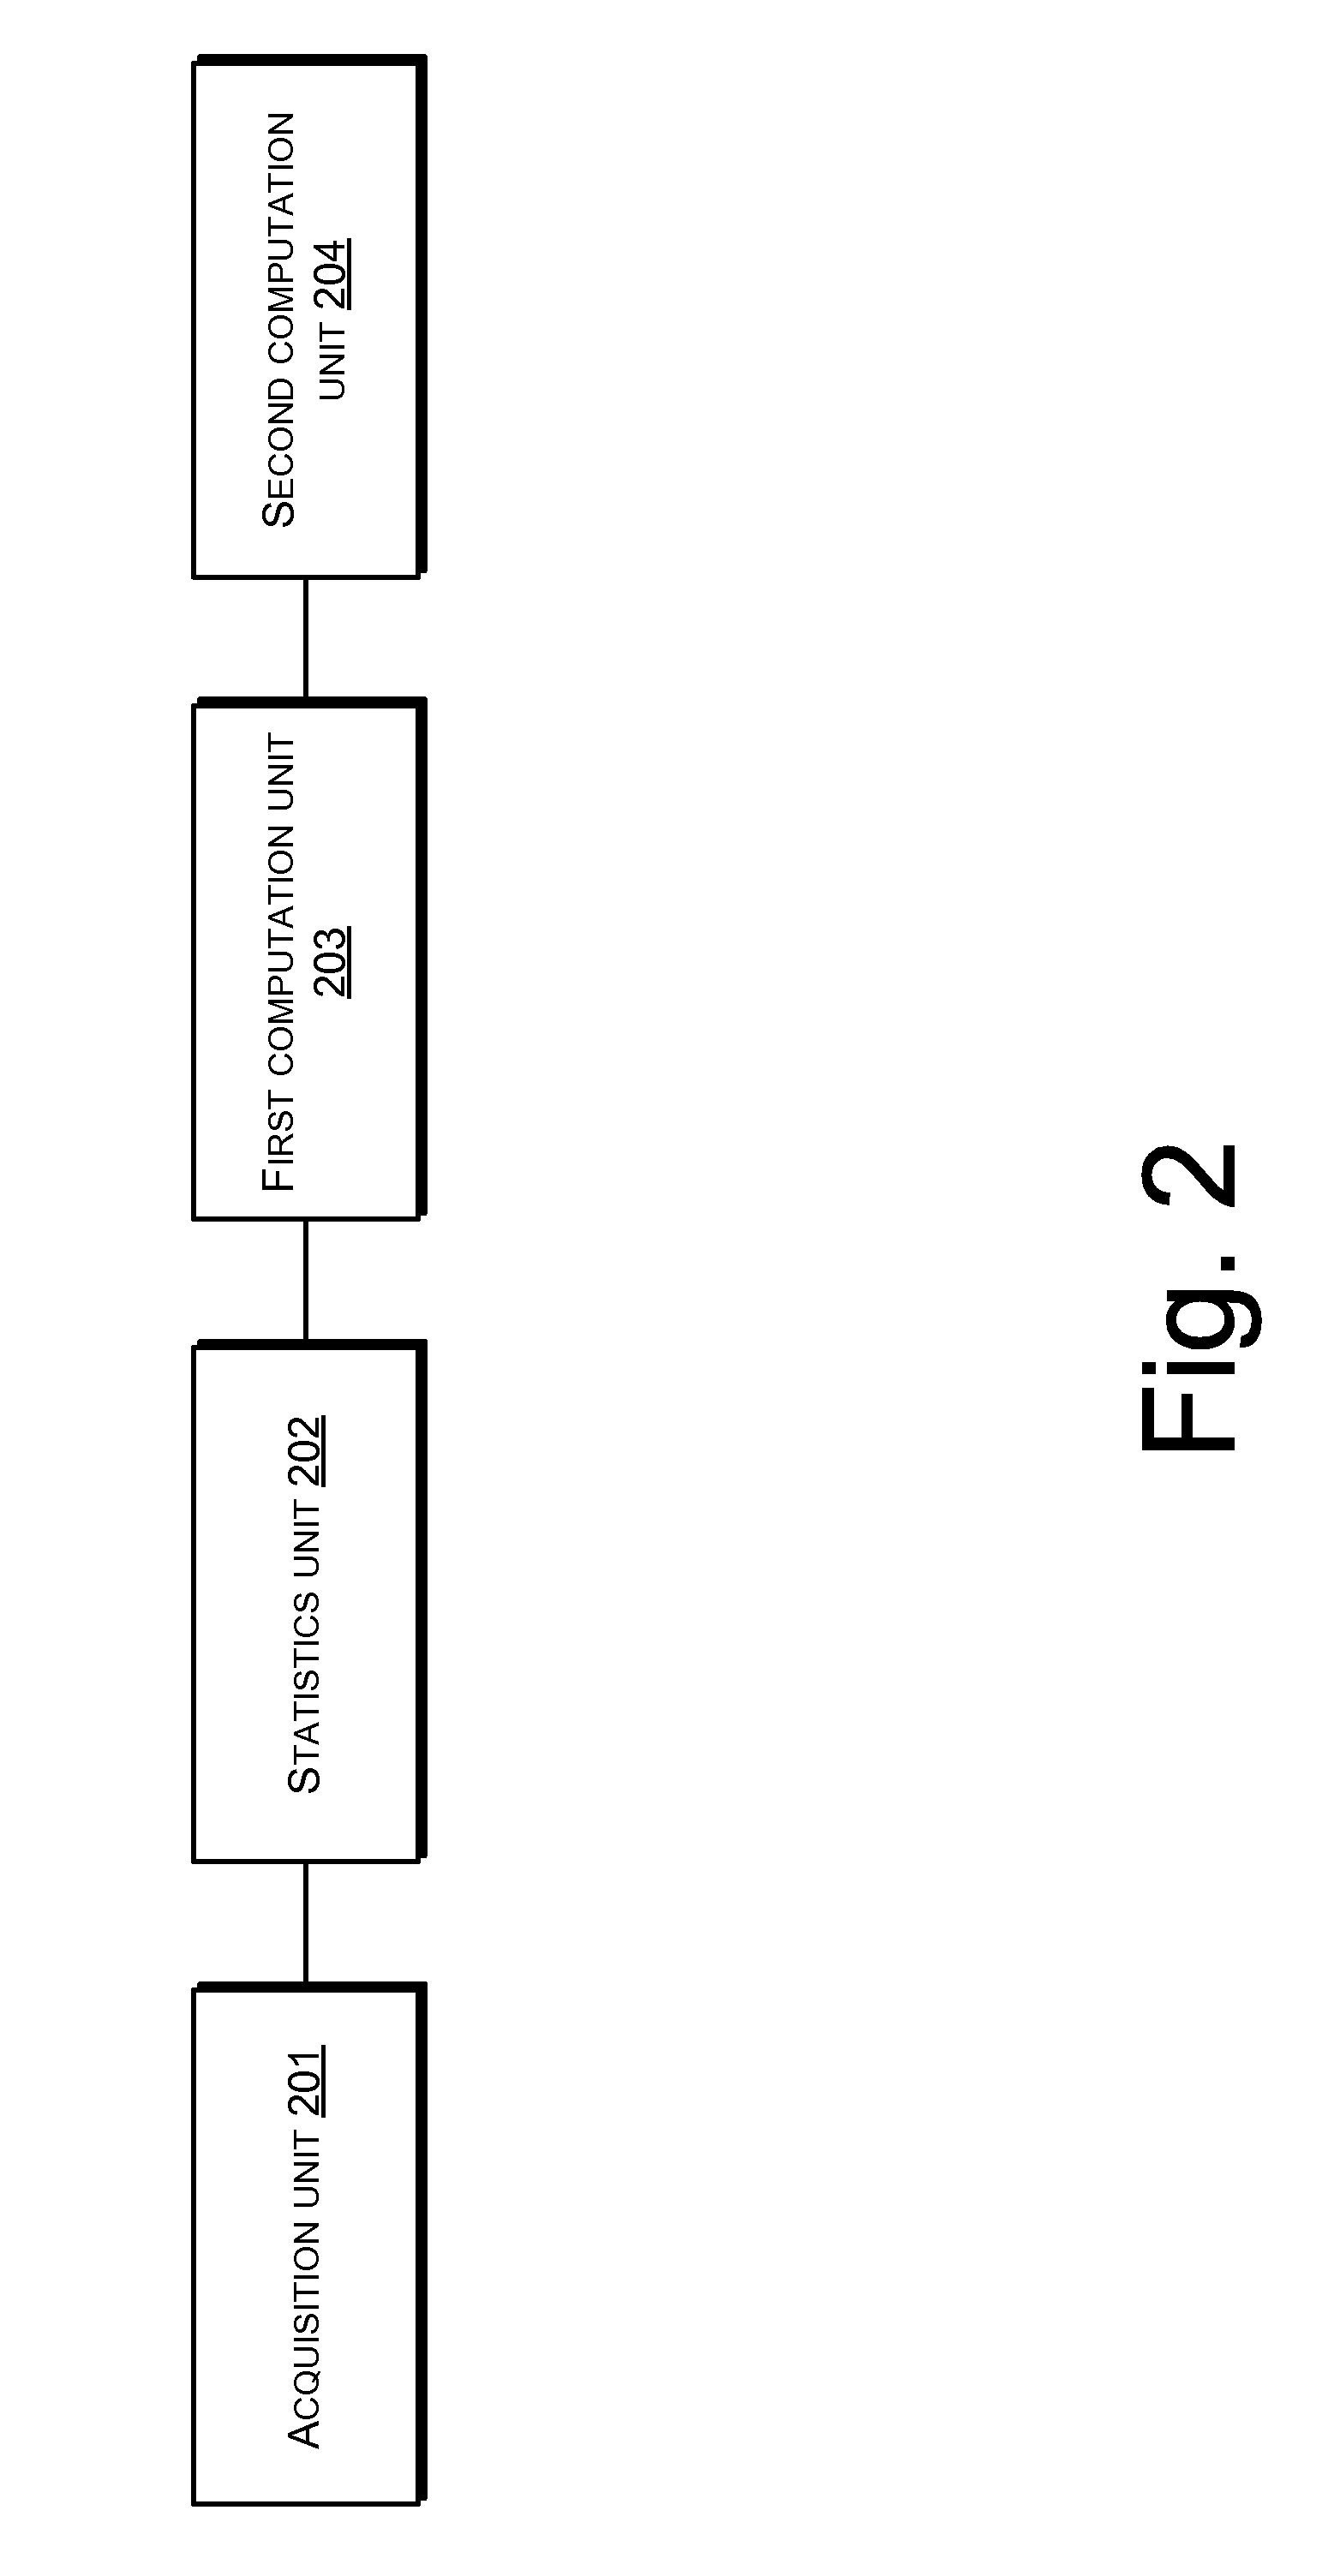 Method and Apparatus of Generating Update Parameters and Displaying Correlated Keywords